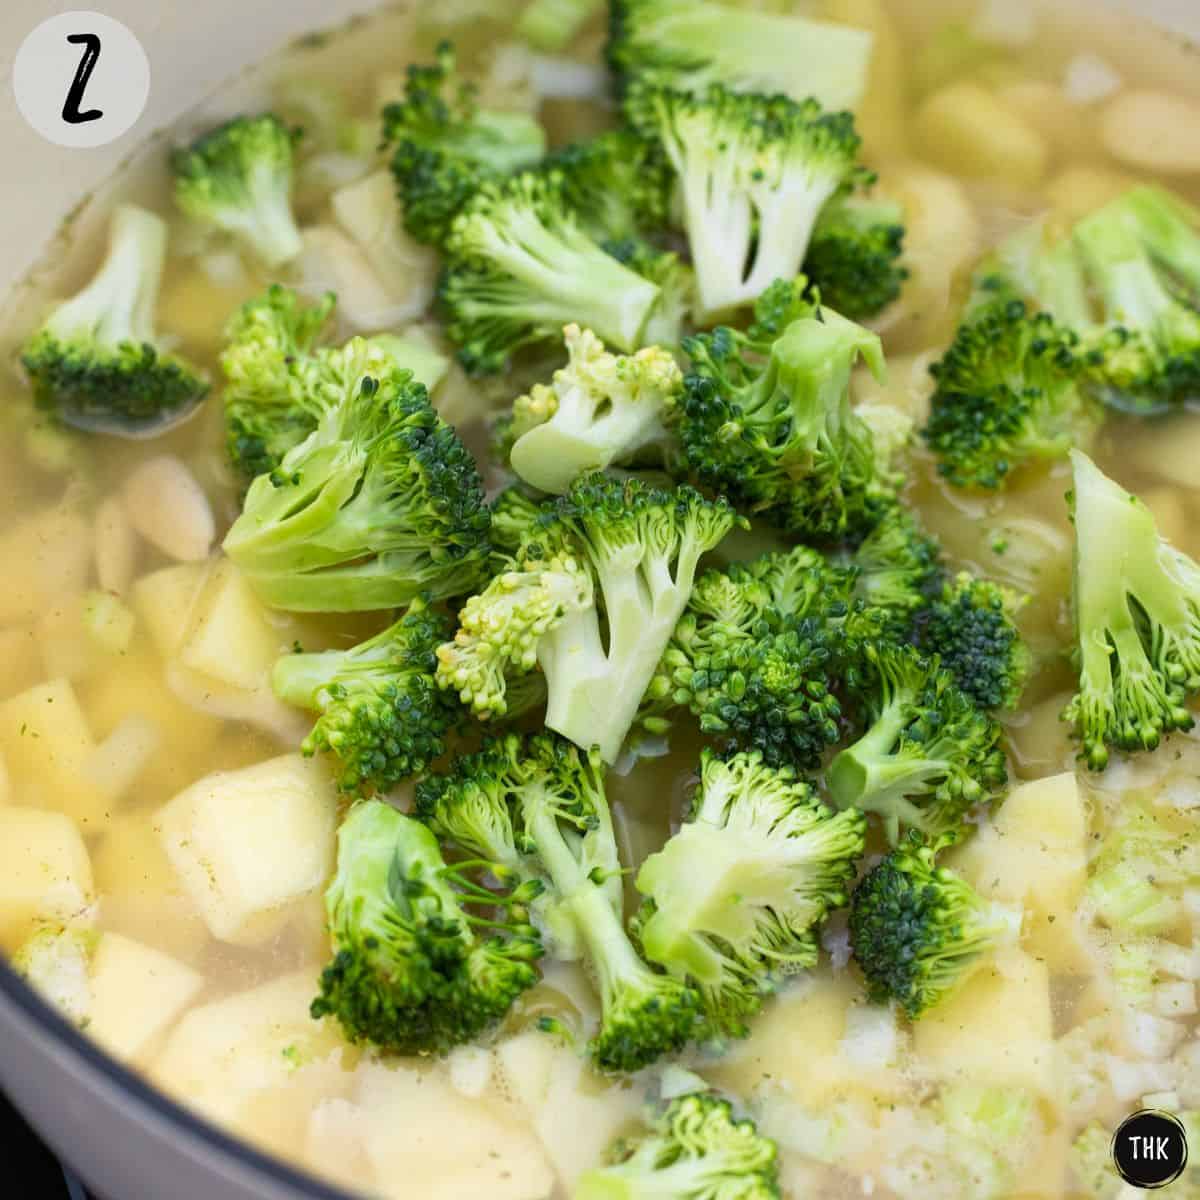 Pot with cubed potatoes, broccoli, broth, spices and other veggies.